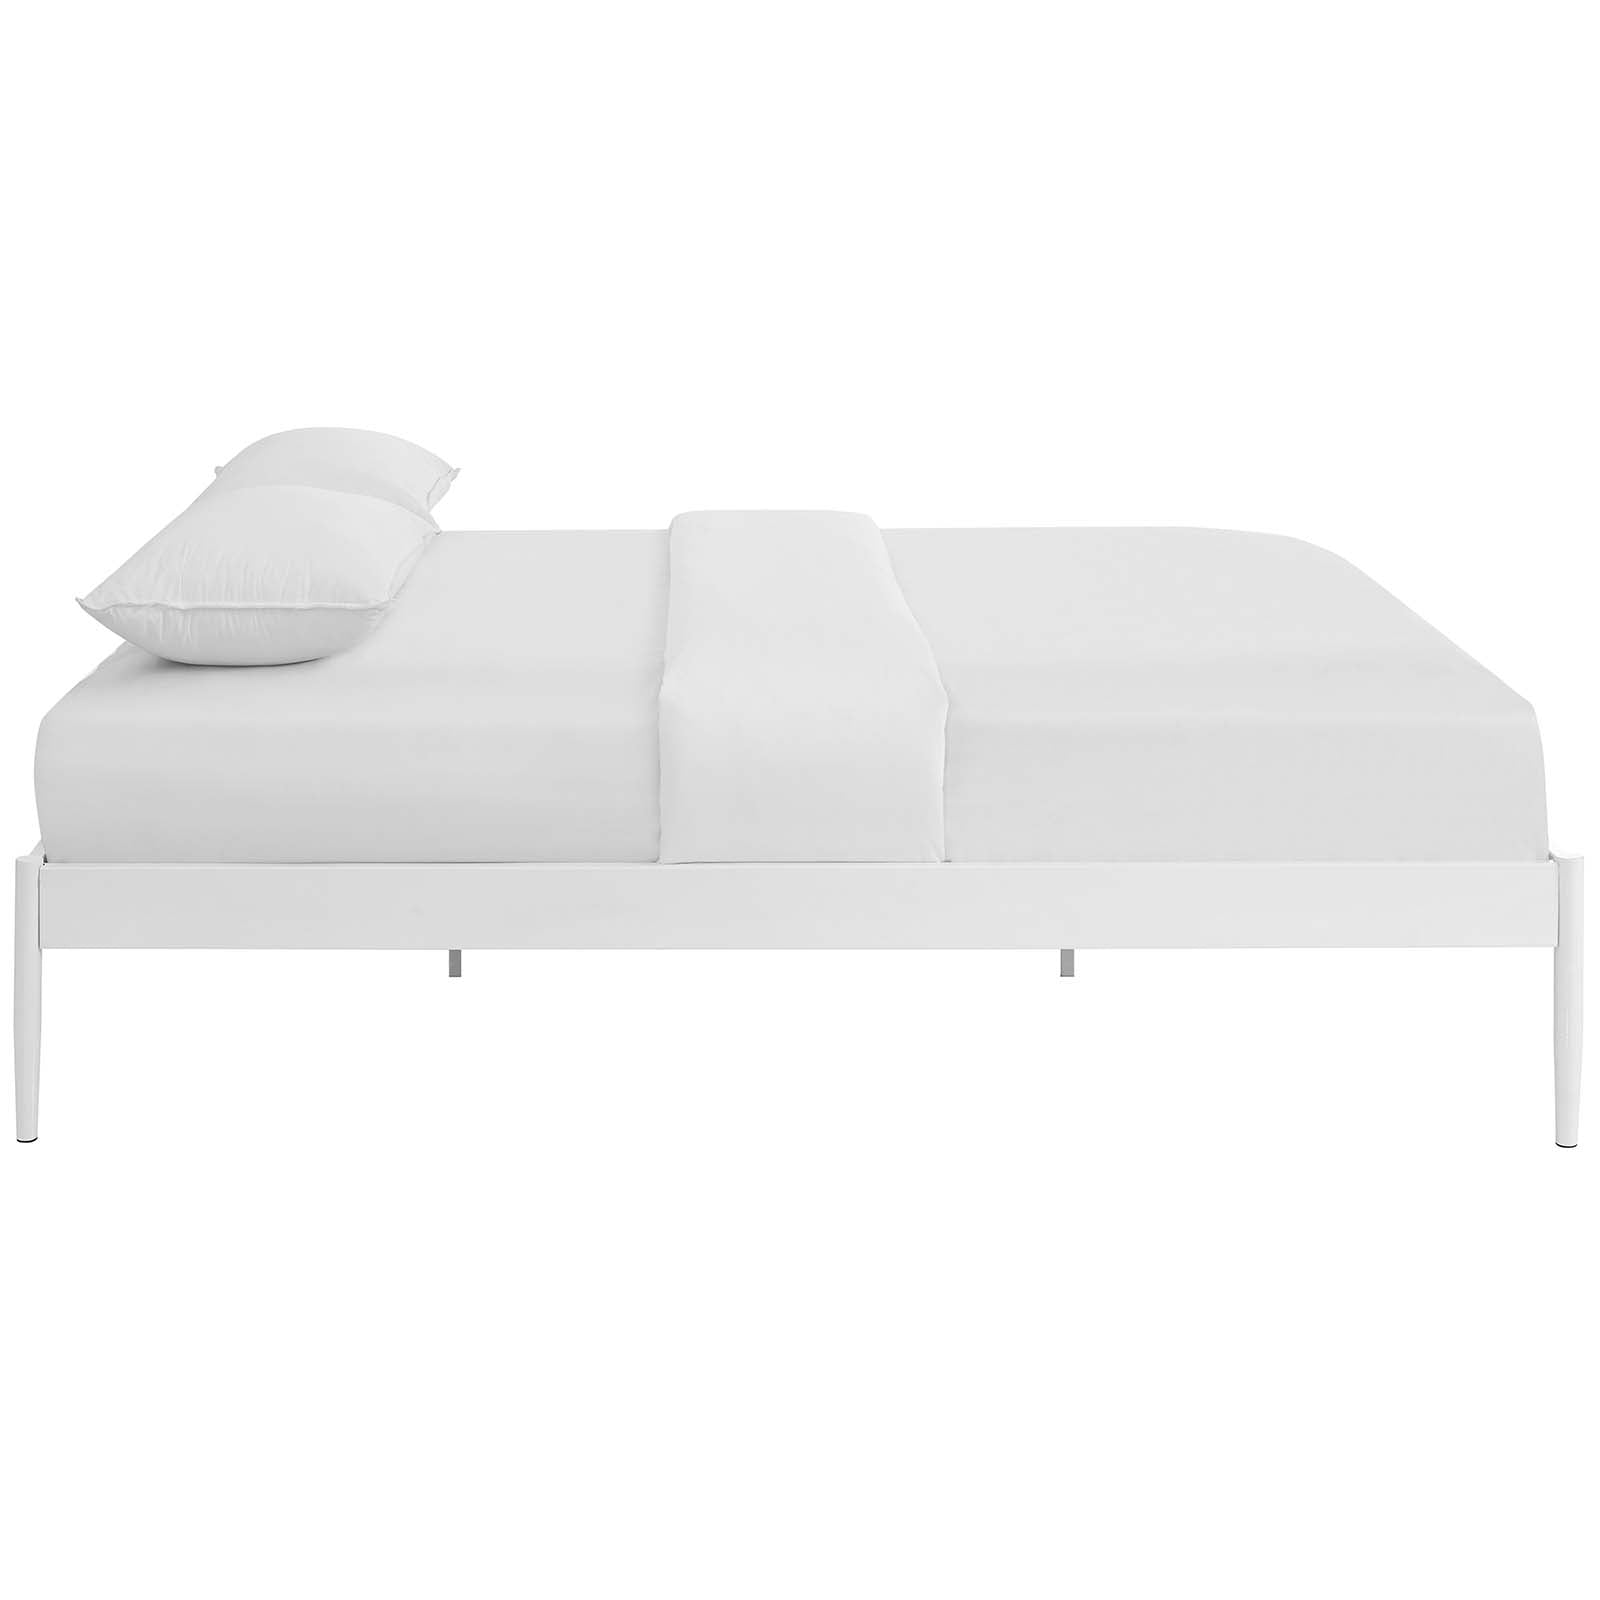 Modway Beds - Elsie Queen Bed Frame White